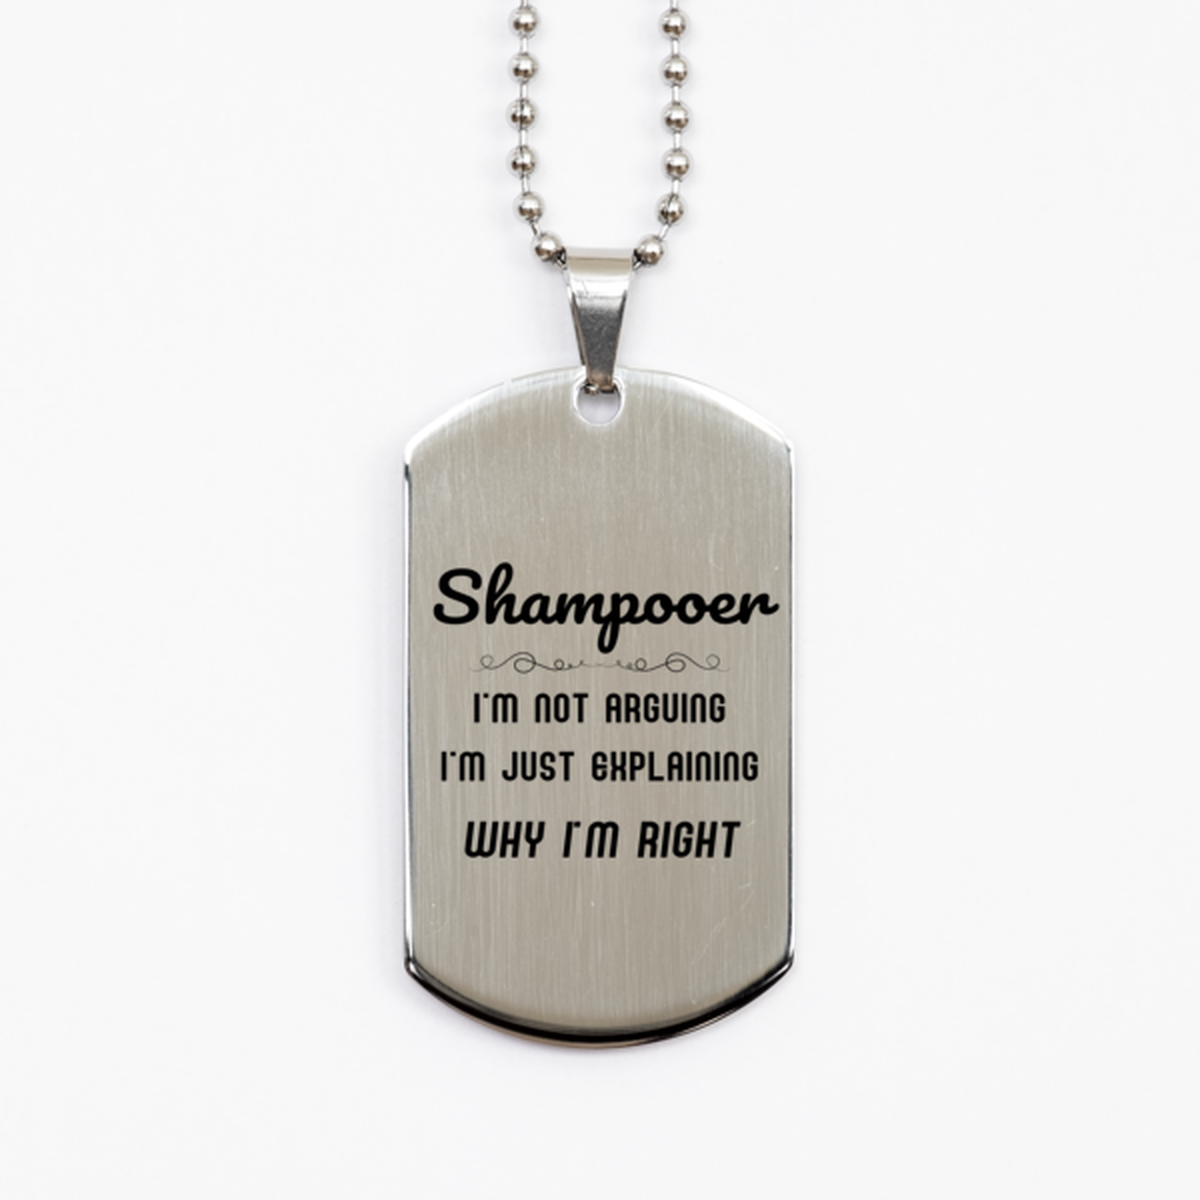 Shampooer I'm not Arguing. I'm Just Explaining Why I'm RIGHT Silver Dog Tag, Funny Saying Quote Shampooer Gifts For Shampooer Graduation Birthday Christmas Gifts for Men Women Coworker